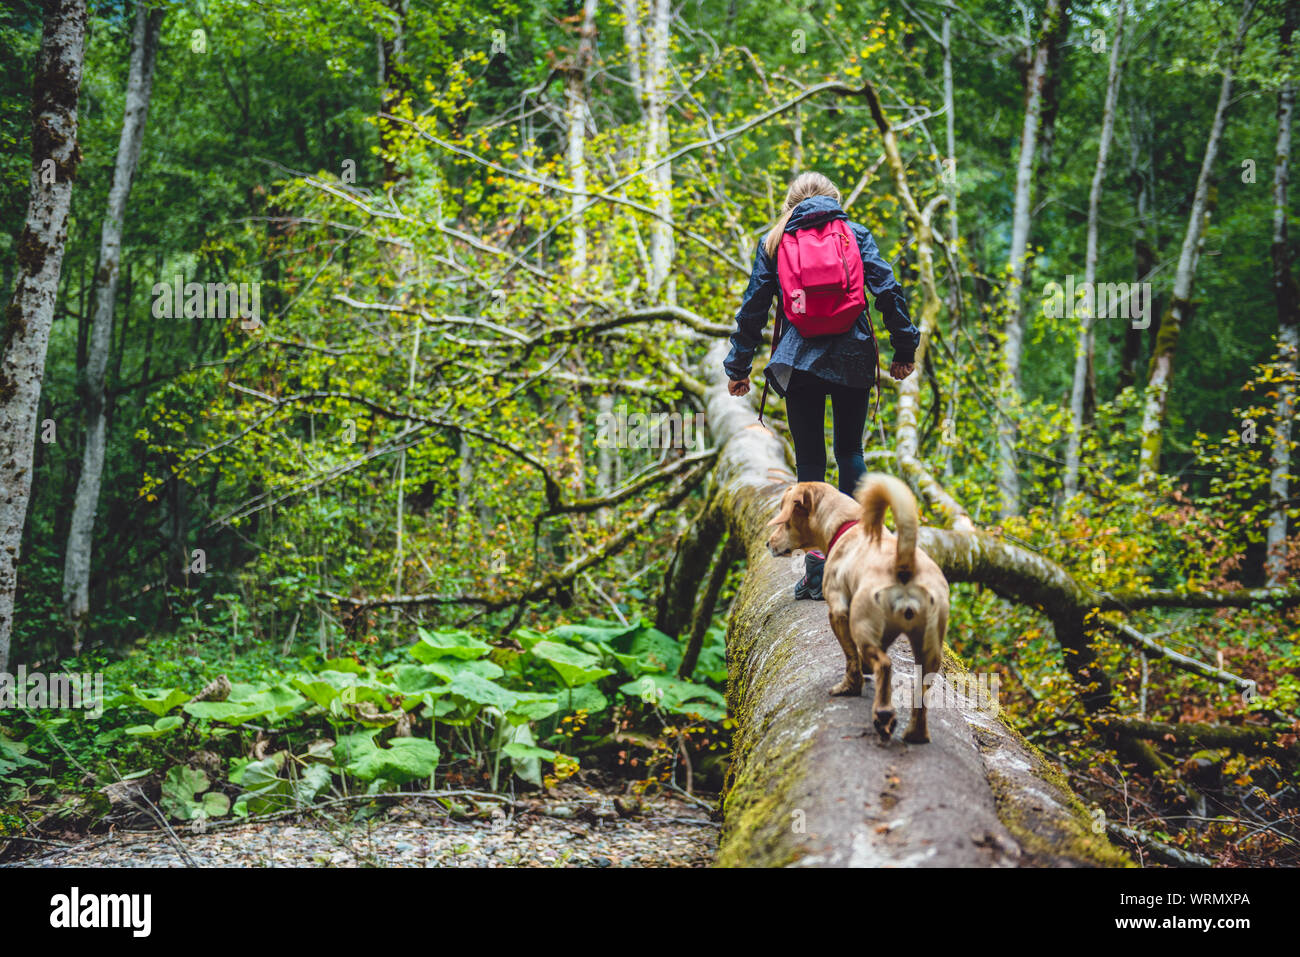 Girl with a small yellow dog hiking in forest and crossing over tree log Stock Photo